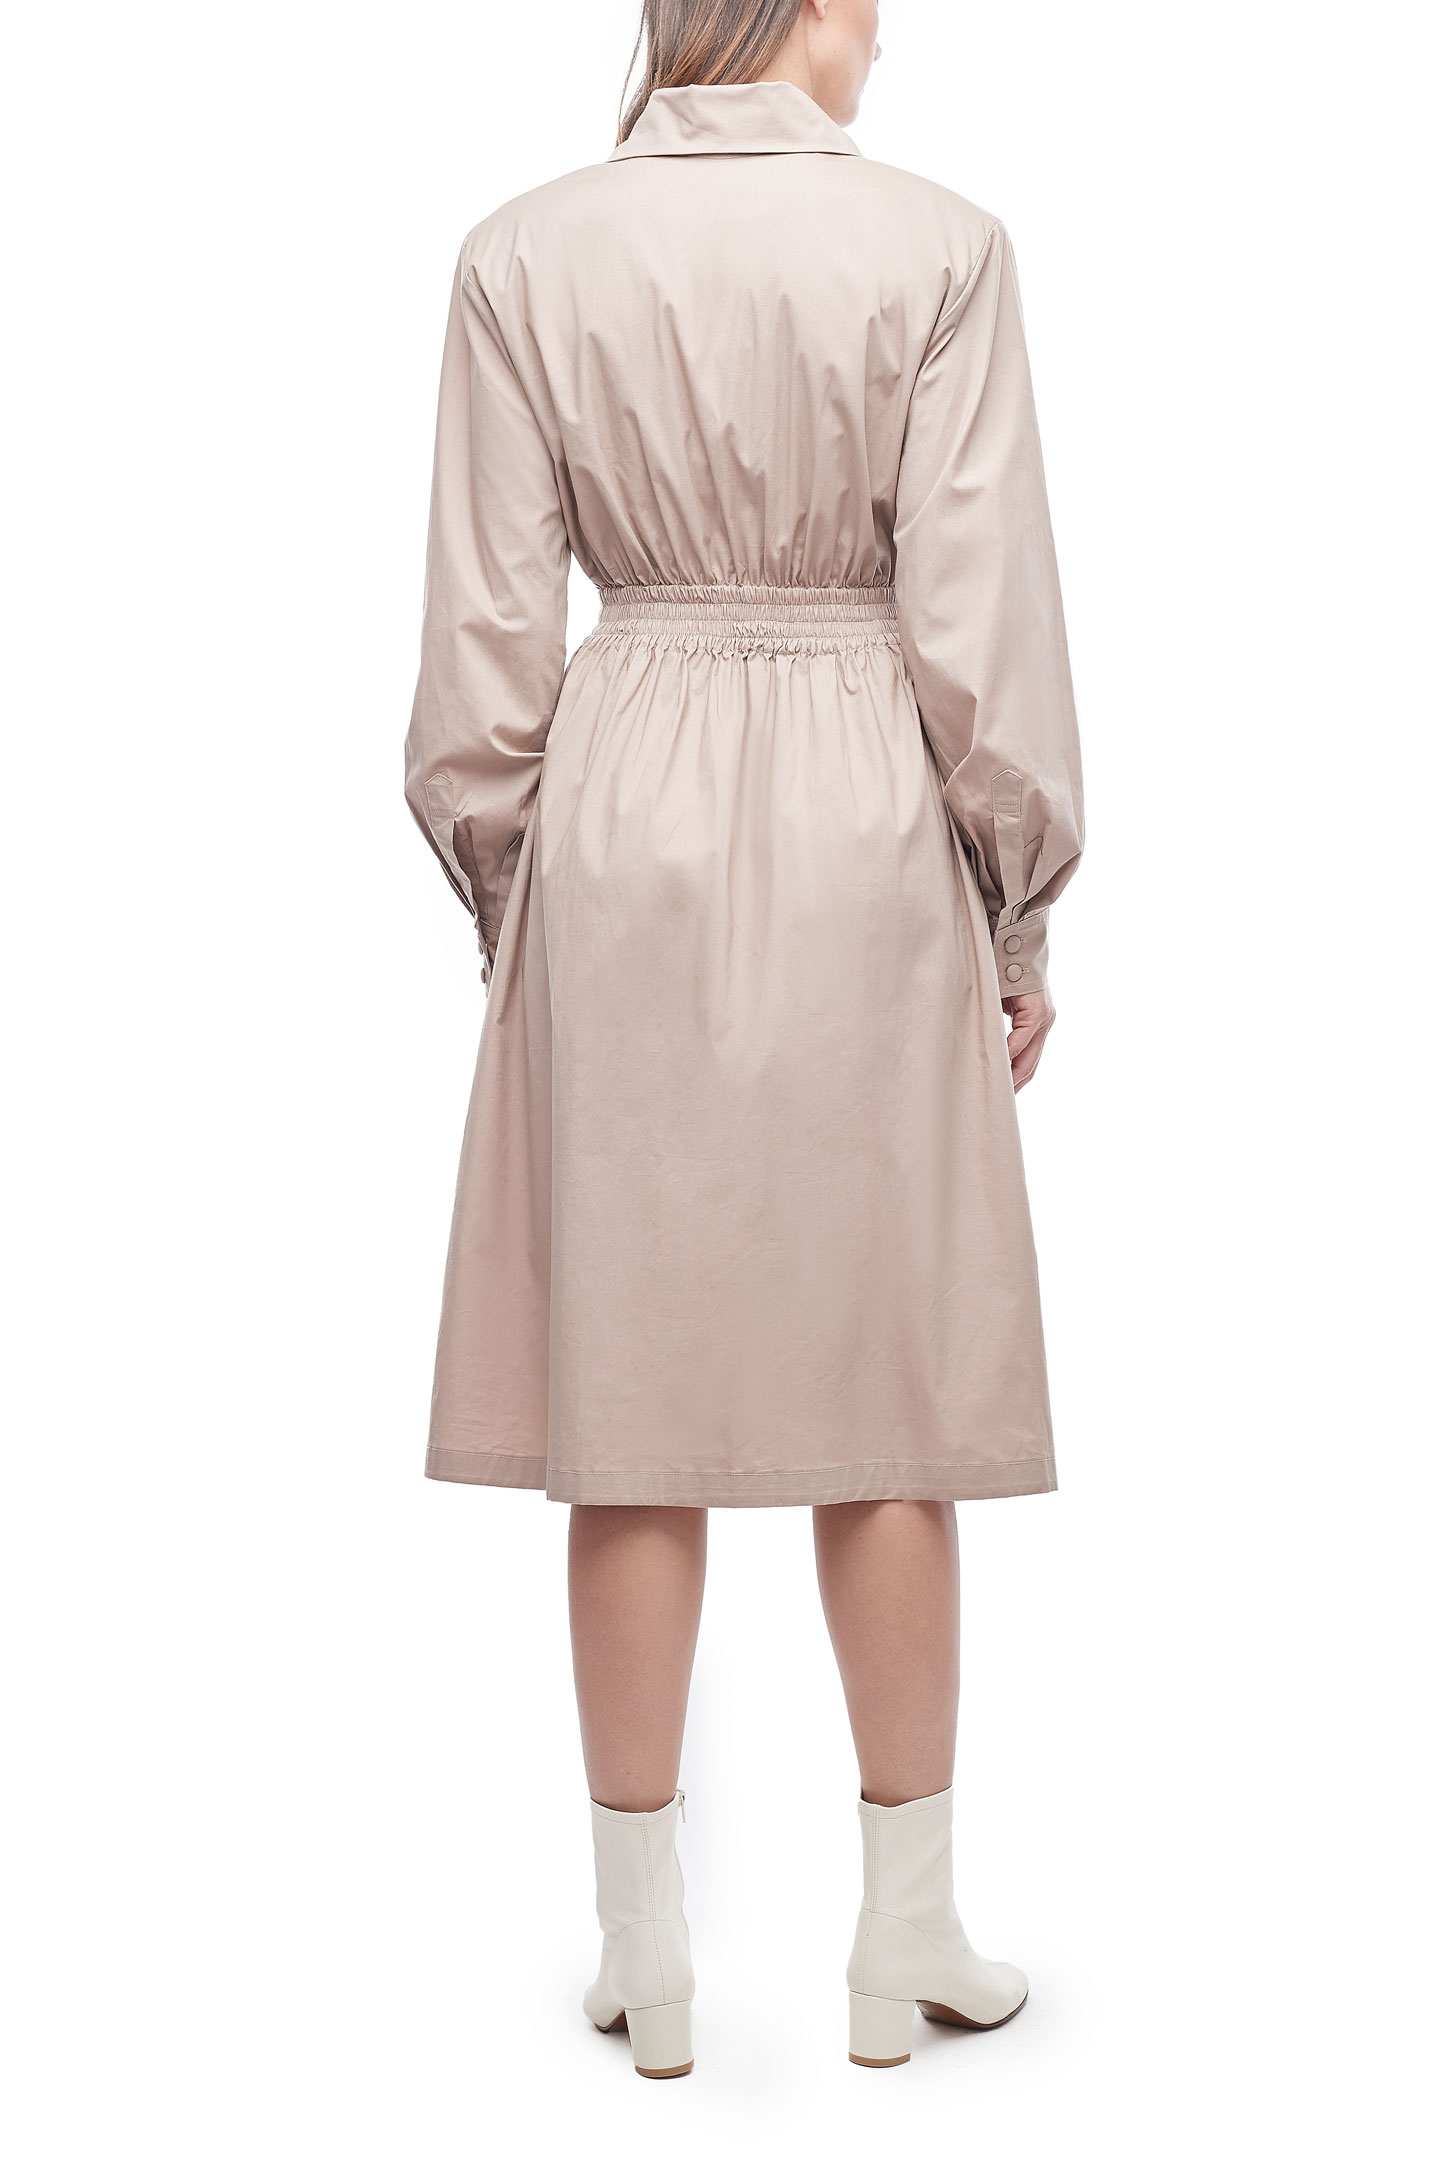 The Tyler Coat Dress in Nude - Atelier Patty Ang